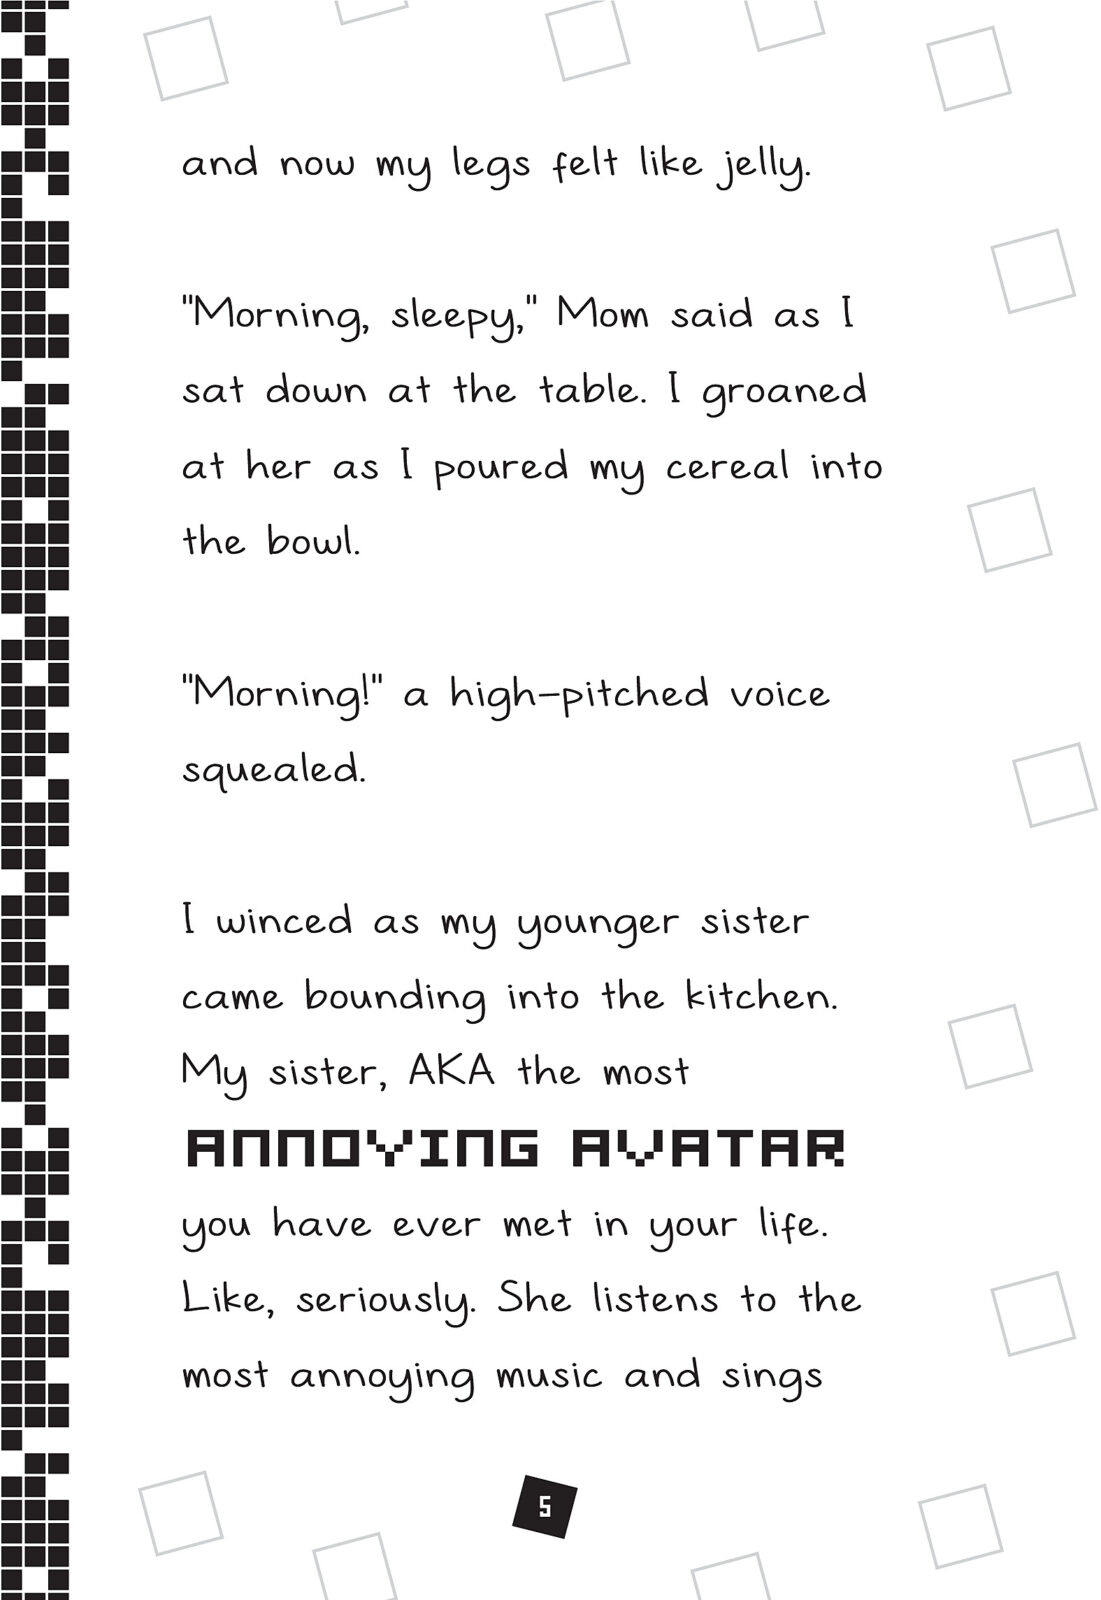 Diary of a Roblox Pro Duo by Ari Avatar (Book Pack)